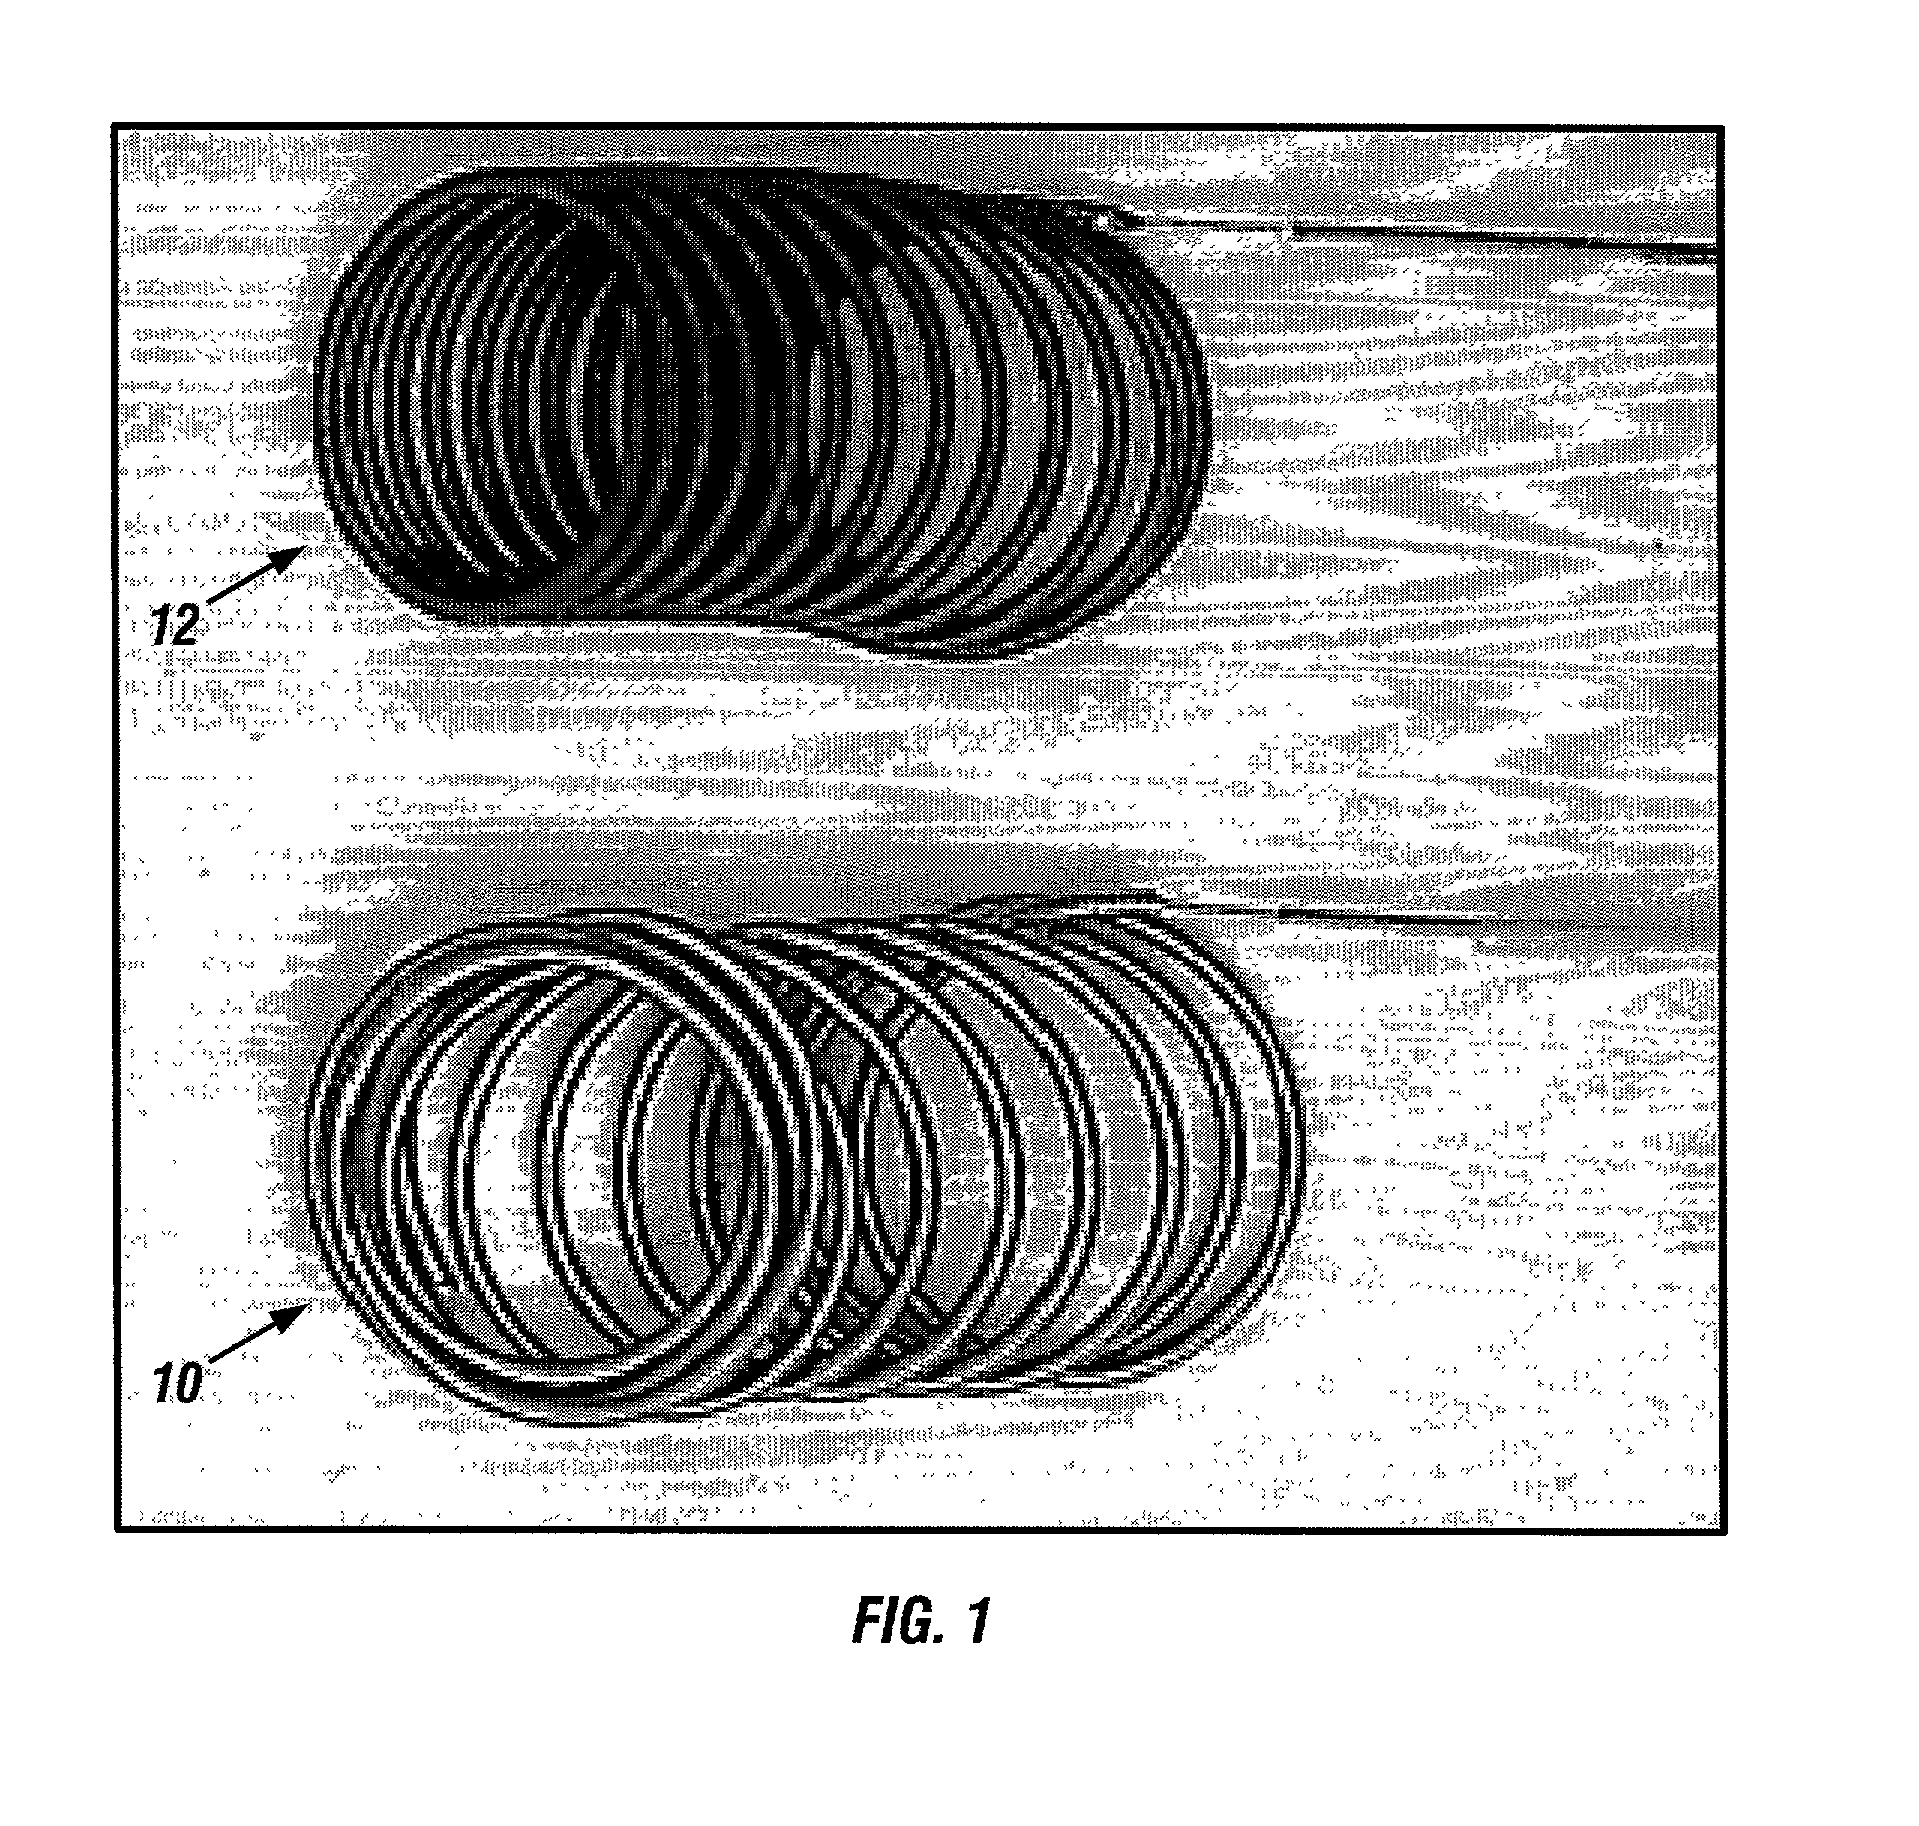 Bioabsorbable polymeric implants and a method of using the same to create occlusions